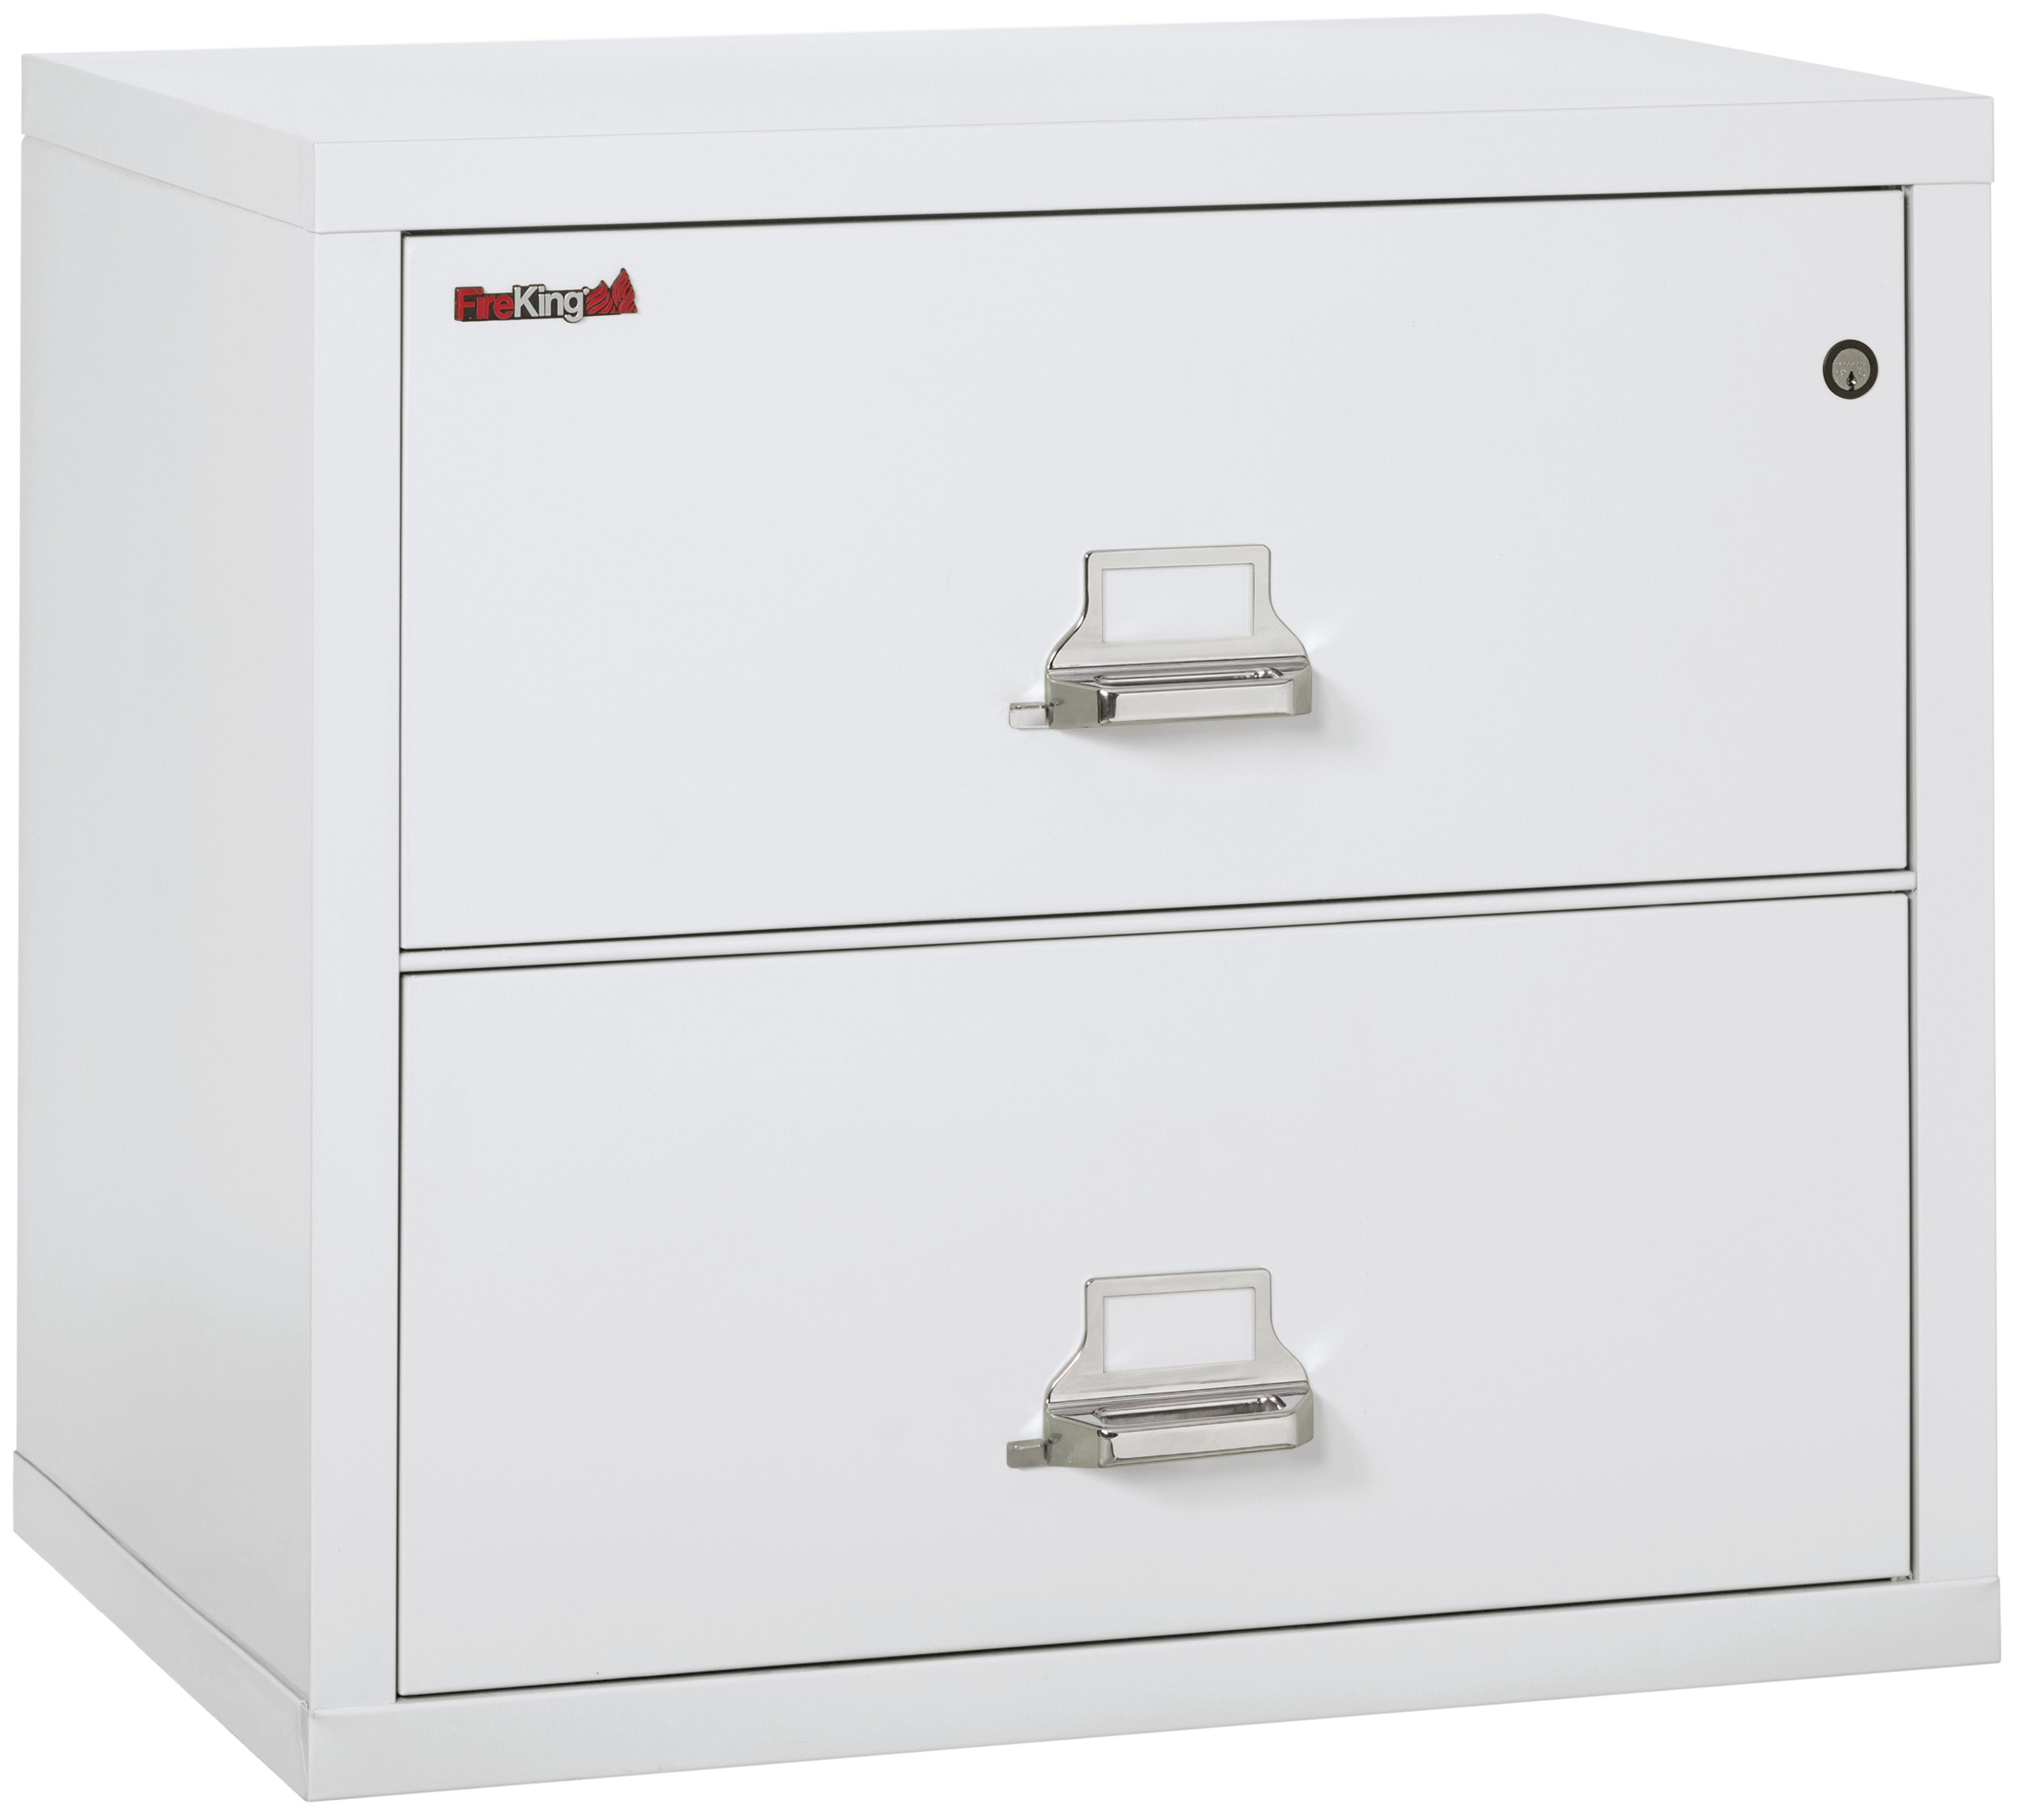 Fireking 2 Drawer 31" wide Classic Lateral fireproof File Cabinet-Arctic White - image 1 of 3